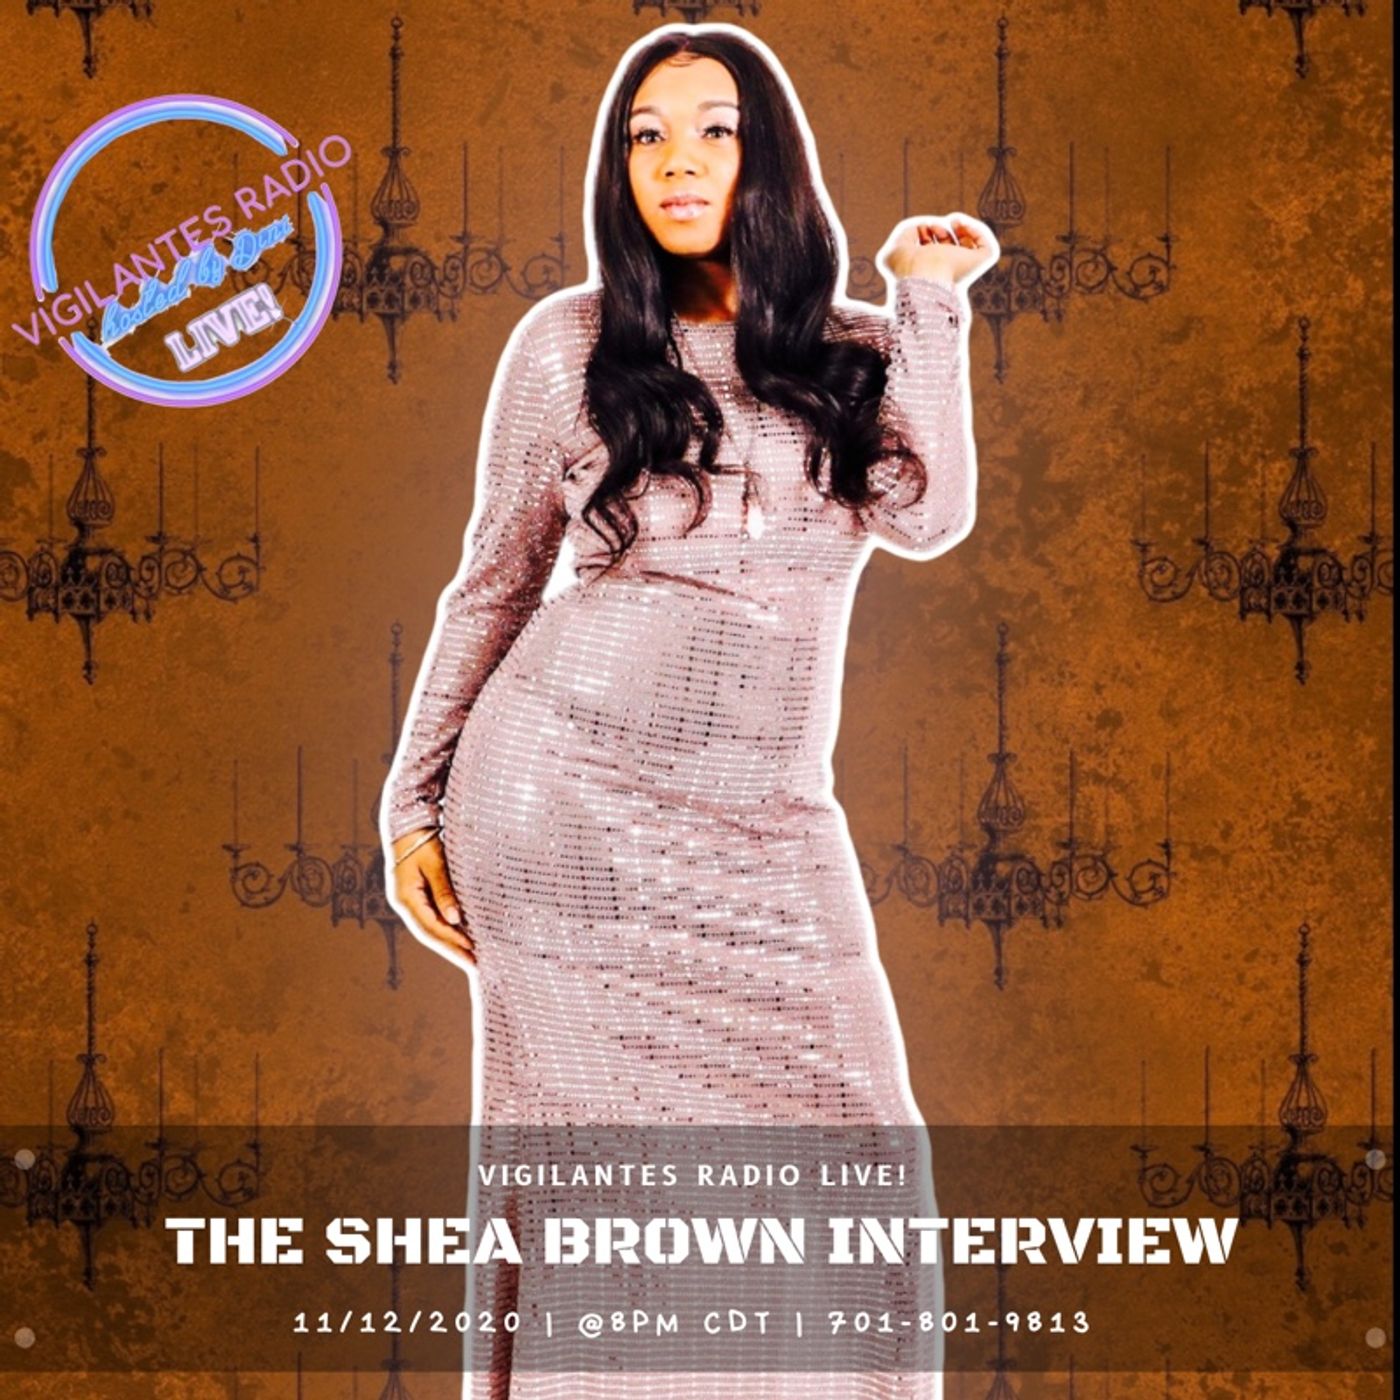 The Shea Brown Interview. Image